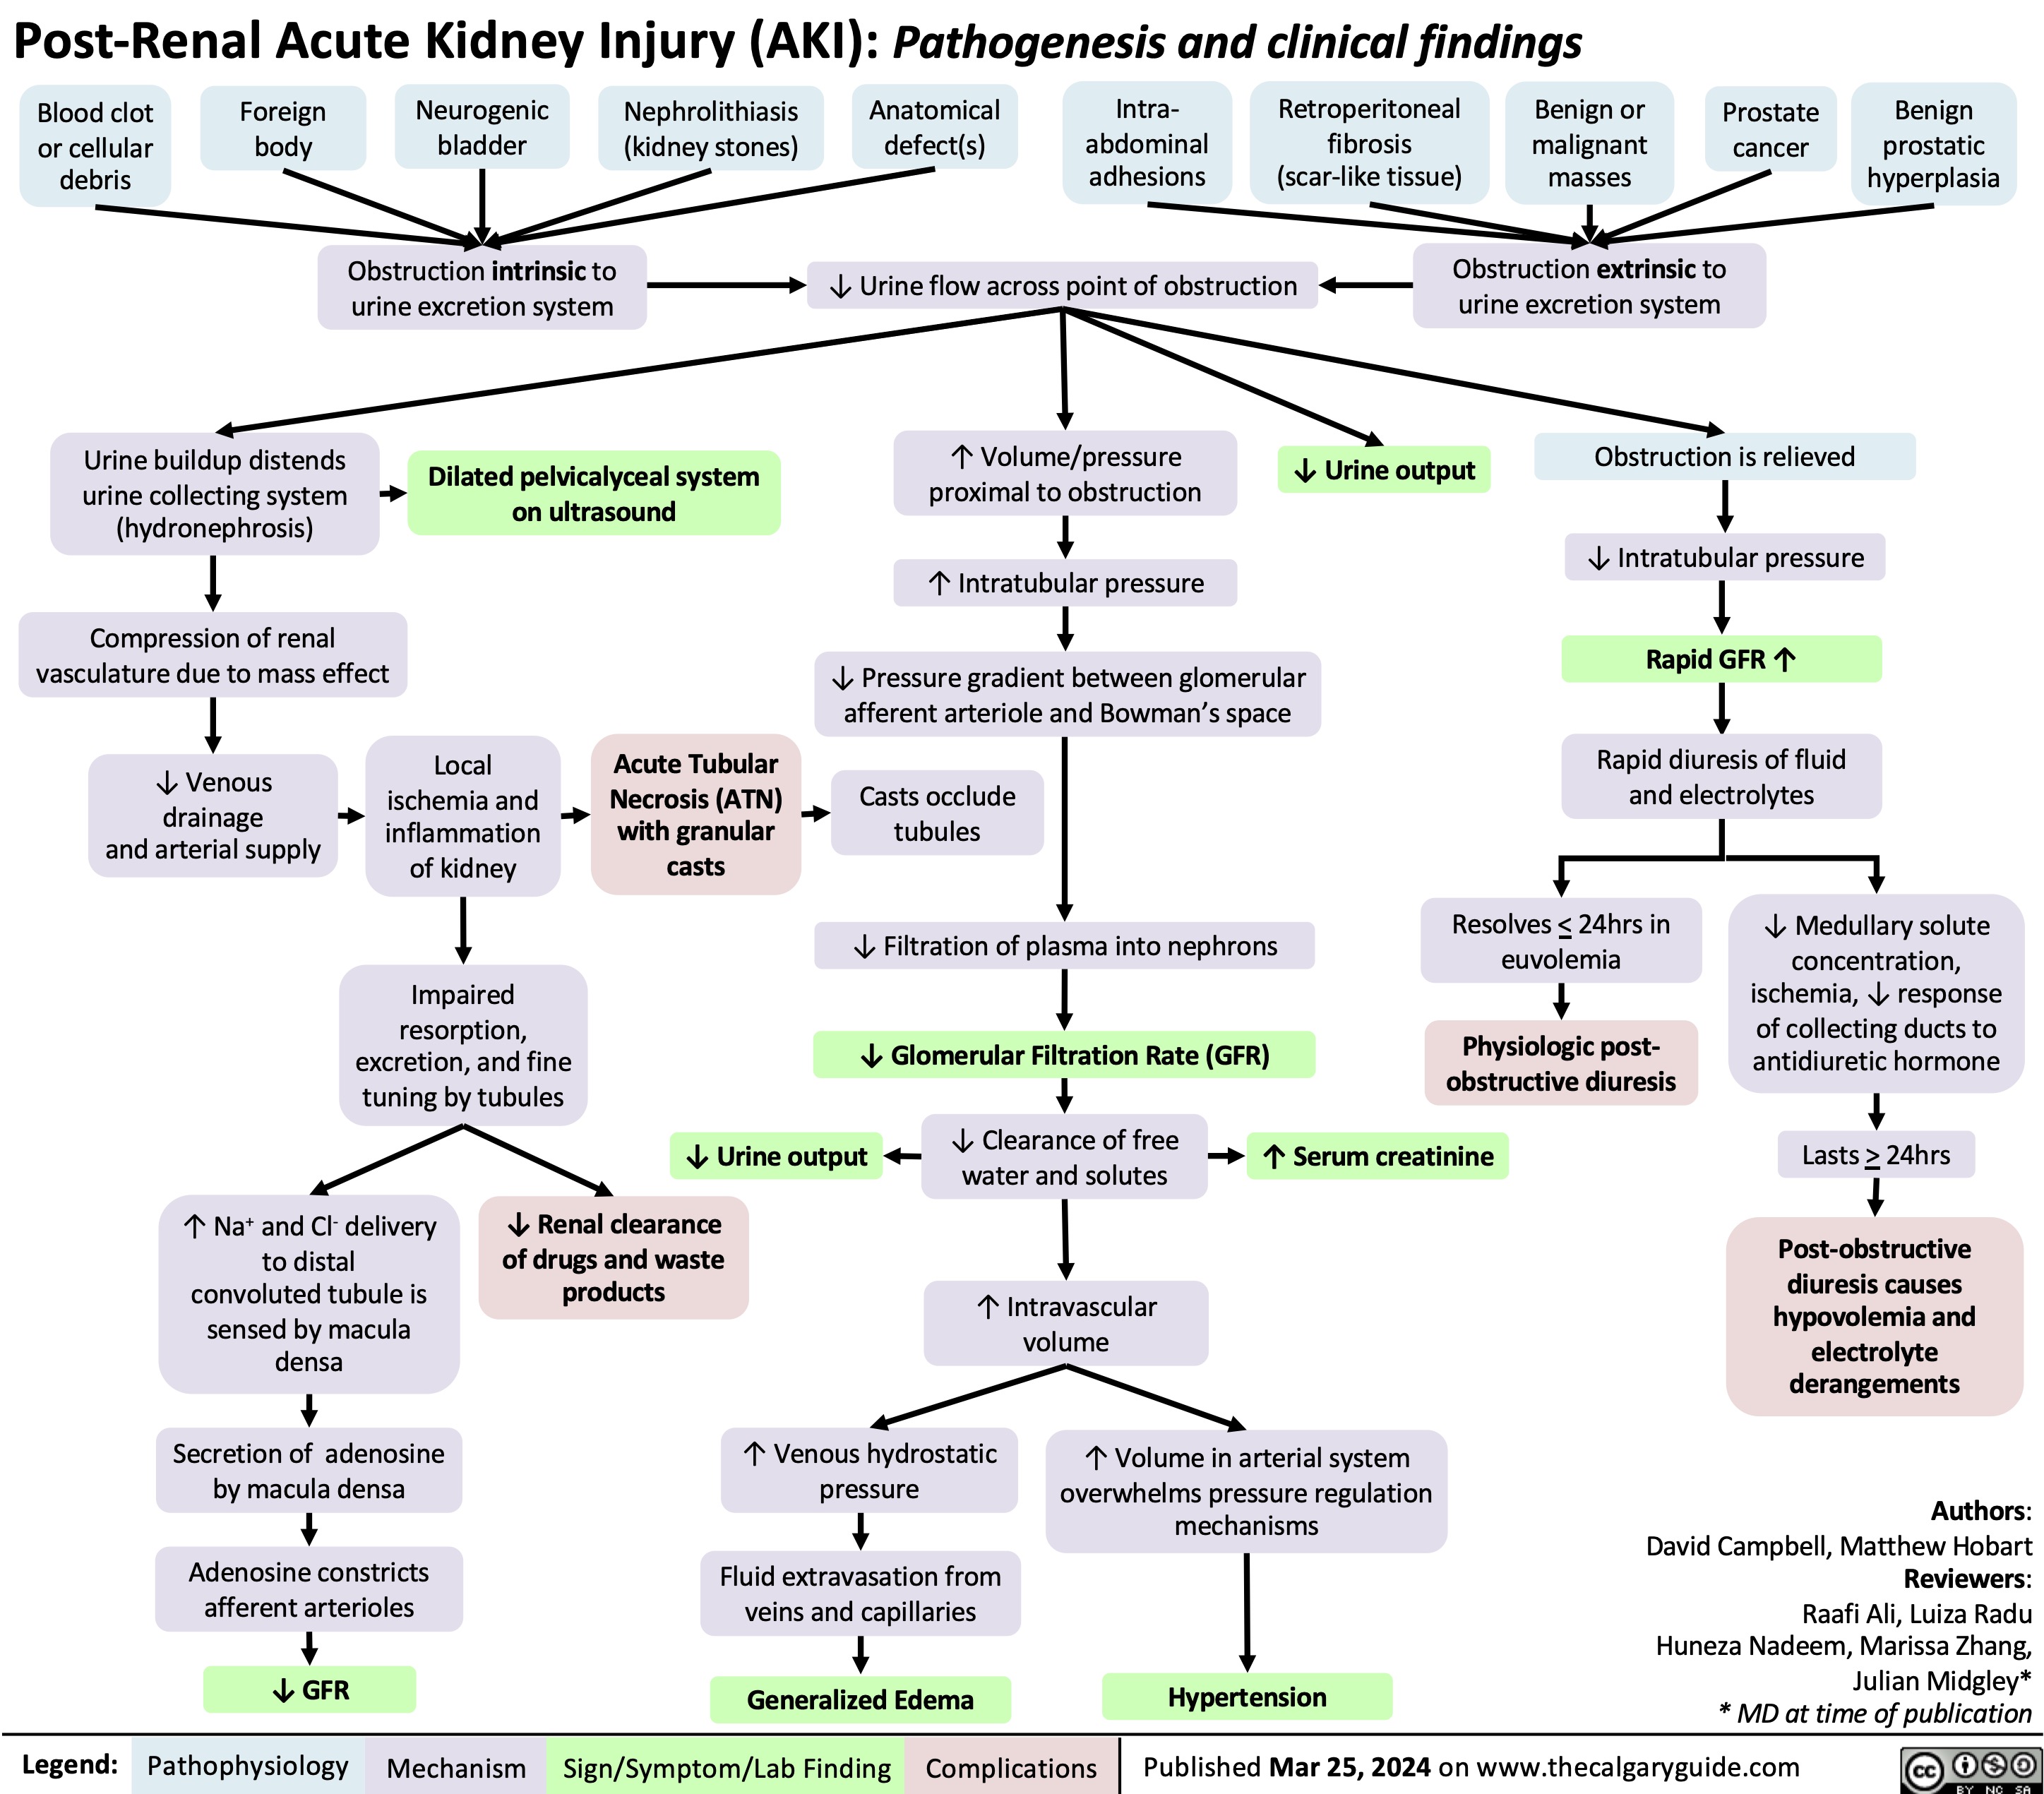 Post-Renal Acute Kidney Injury (AKI): Pathogenesis and clinical findings
          Blood clot or cellular debris
Foreign body
Neurogenic bladder
Obstruction intrinsic to urine excretion system
Nephrolithiasis (kidney stones)
Anatomical defect(s)
Intra- abdominal adhesions
Retroperitoneal fibrosis (scar-like tissue)
Benign or malignant masses
Prostate cancer
Benign prostatic hyperplasia
      ↓ Urine flow across point of obstruction Obstruction extrinsic to urine excretion system
         Urine buildup distends urine collecting system (hydronephrosis)
Compression of renal vasculature due to mass effect
↑ Volume/pressure proximal to obstruction
↑ Intratubular pressure
↓ Pressure gradient between glomerular afferent arteriole and Bowman’s space
Casts occlude tubules
↓ Filtration of plasma into nephrons
↓ Glomerular Filtration Rate (GFR)
Obstruction is relieved ↓ Intratubular pressure Rapid GFR ↑
Rapid diuresis of fluid and electrolytes
  Dilated pelvicalyceal system on ultrasound
↓ Urine output
          ↓ Venous drainage
and arterial supply
Local ischemia and inflammation of kidney
Impaired resorption, excretion, and fine tuning by tubules
Acute Tubular Necrosis (ATN) with granular casts
     ↓ Urine output
↓ Clearance of free water and solutes
↑ Intravascular volume
↑ Serum creatinine
↓ Medullary solute concentration, ischemia, ↓ response of collecting ducts to antidiuretic hormone
Lasts > 24hrs
Post-obstructive diuresis causes hypovolemia and electrolyte derangements
Authors: David Campbell, Matthew Hobart Reviewers: Raafi Ali, Luiza Radu Huneza Nadeem, Marissa Zhang, Julian Midgley* * MD at time of publication
Resolves < 24hrs in euvolemia
Physiologic post- obstructive diuresis
            ↑ Na+ and Cl- delivery to distal convoluted tubule is sensed by macula densa
Secretion of adenosine by macula densa
Adenosine constricts afferent arterioles
↓ GFR
↓ Renal clearance of drugs and waste products
       ↑ Venous hydrostatic pressure
↑ Volume in arterial system overwhelms pressure regulation mechanisms
Hypertension
   Fluid extravasation from veins and capillaries
   Generalized Edema
 Legend:
 Pathophysiology
Mechanism
Sign/Symptom/Lab Finding
 Complications
 Published Mar 25, 2024 on www.thecalgaryguide.com
   